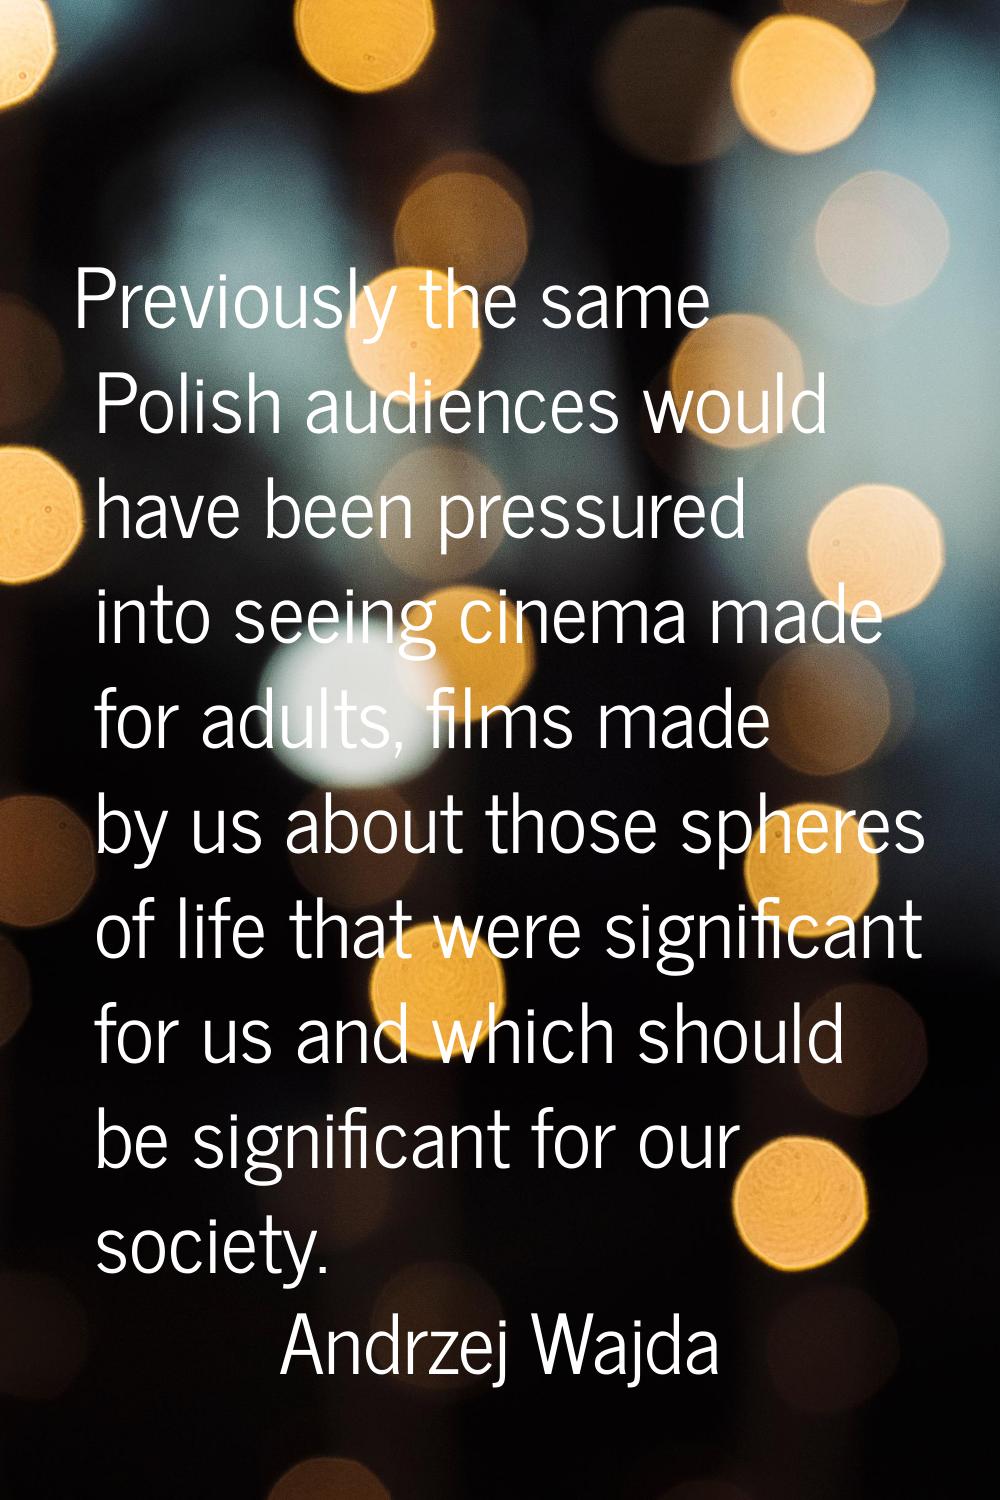 Previously the same Polish audiences would have been pressured into seeing cinema made for adults, 